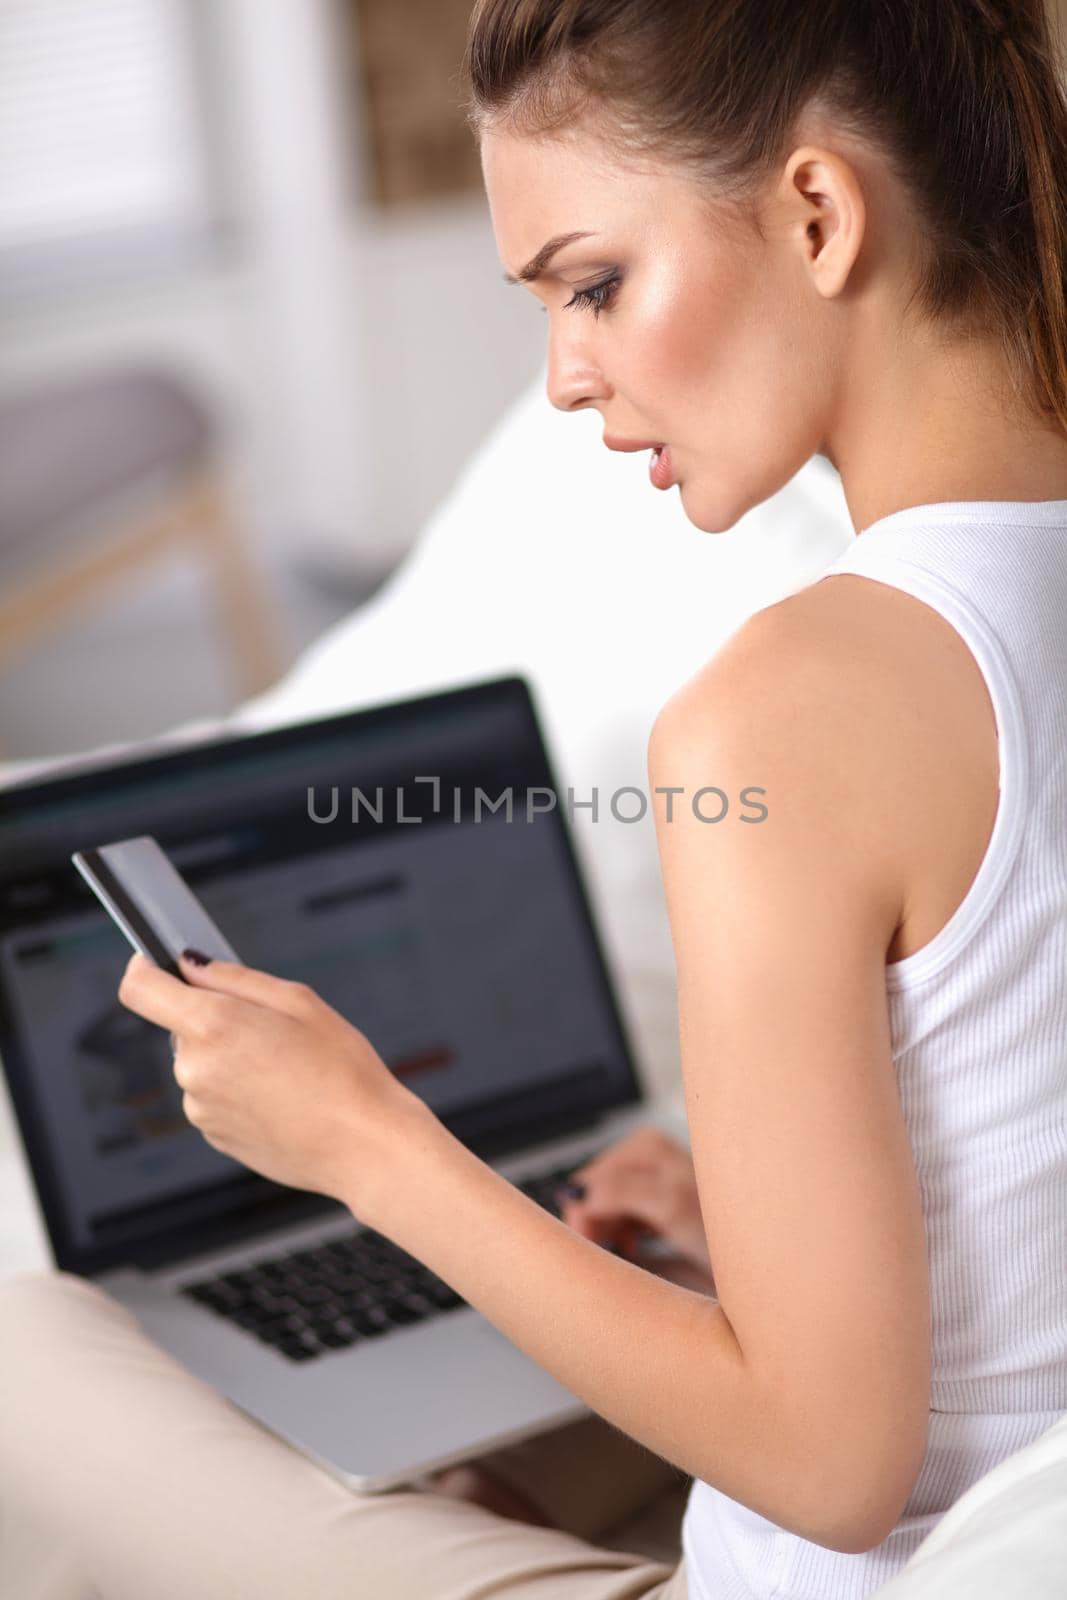 Woman shopping online with credit card and computer.